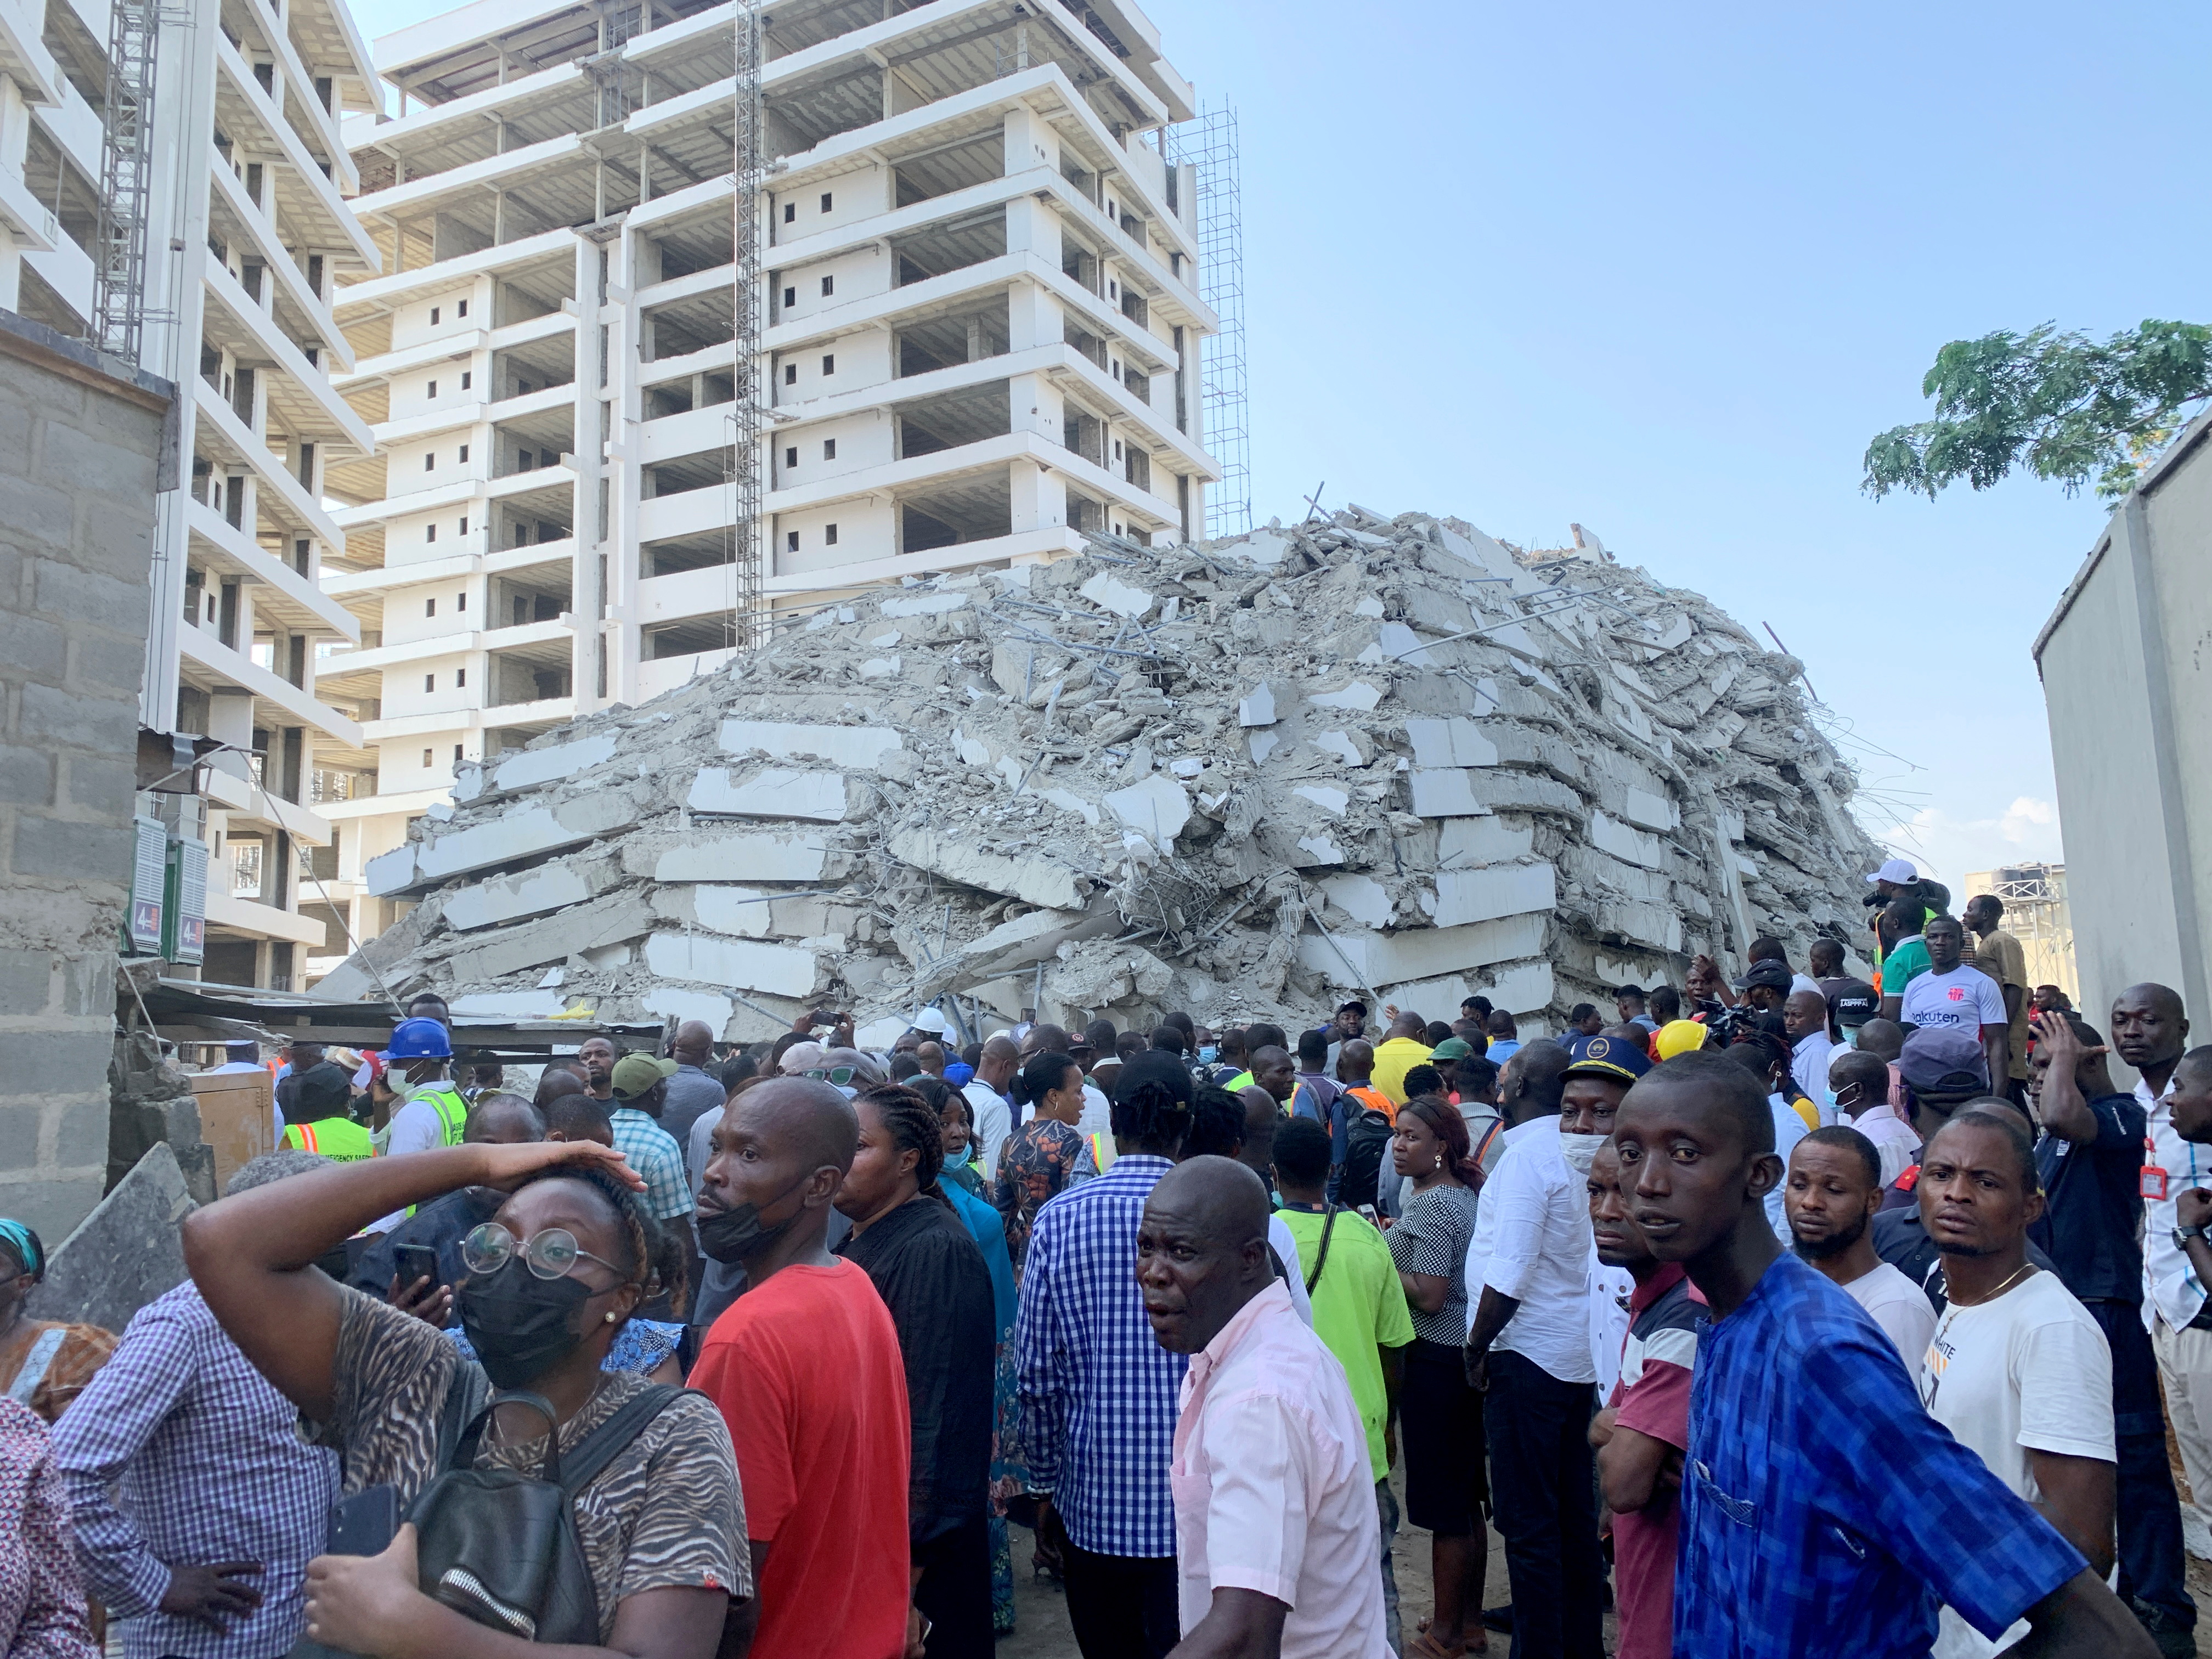 People gather at the site of a collapsed 21-story building in Ikoyi, Lagos